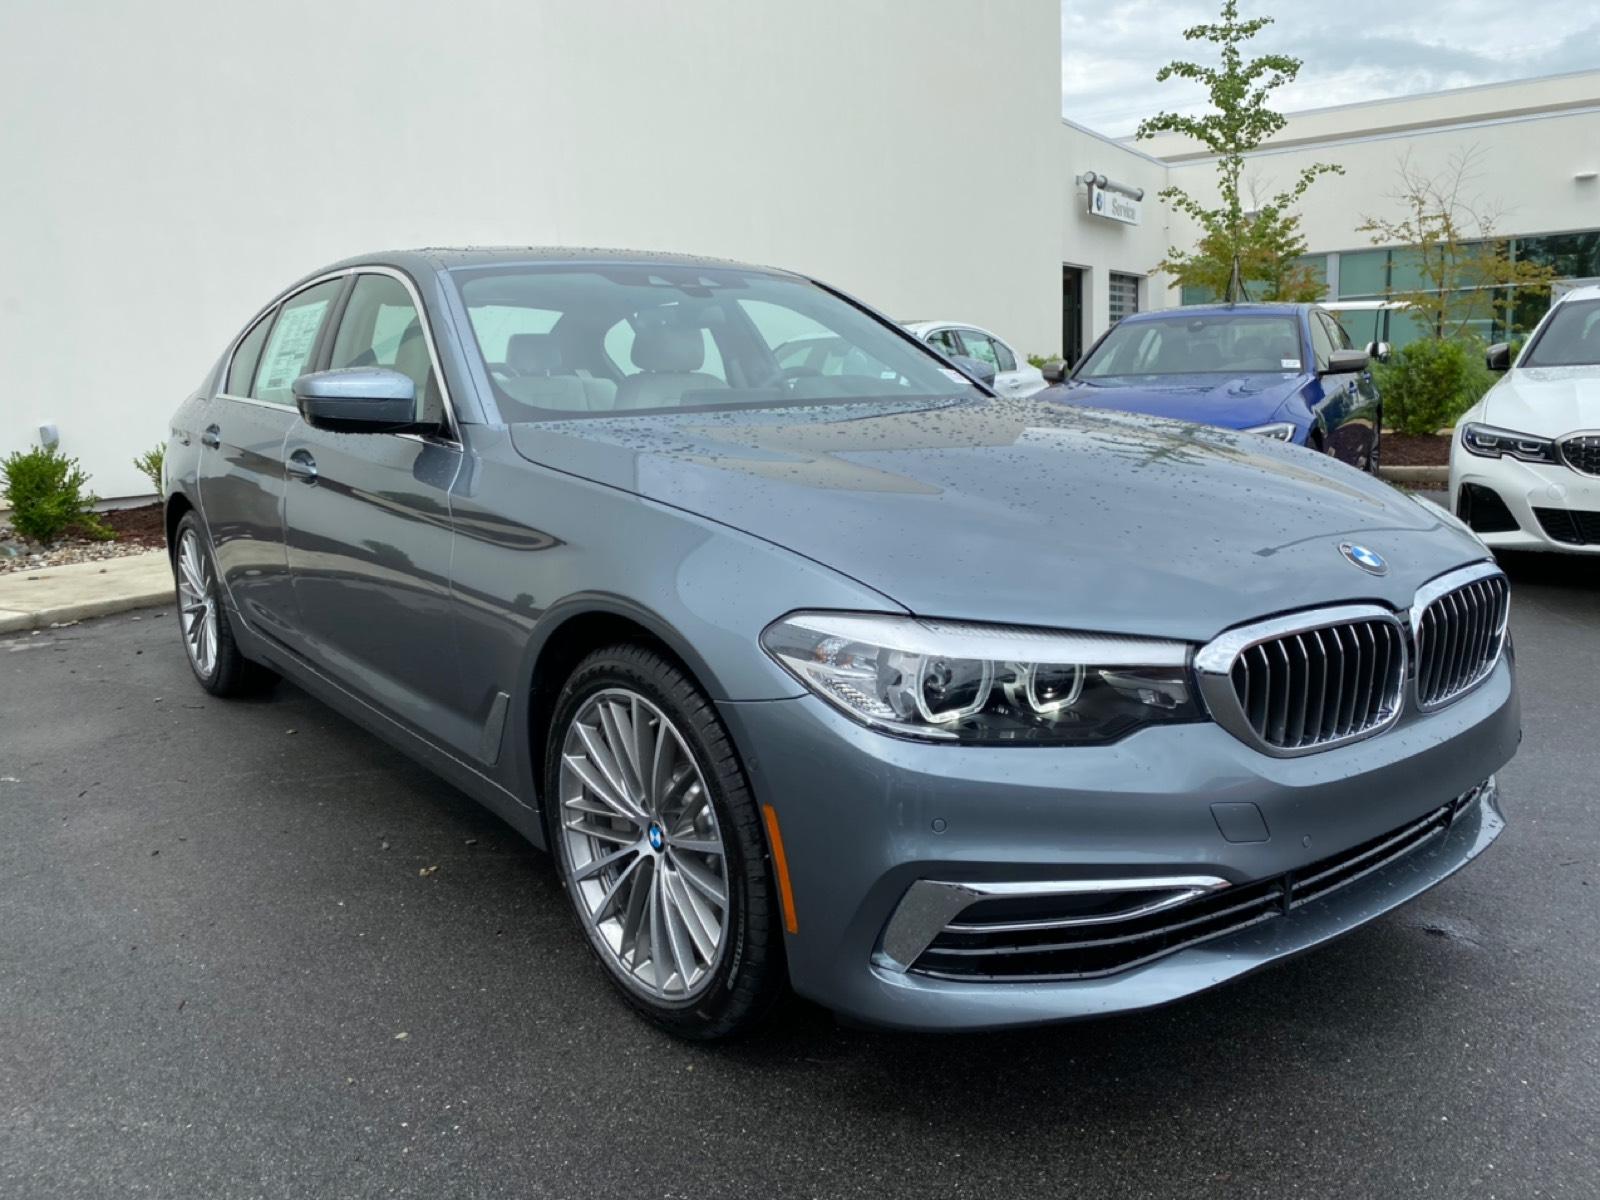 New 2020 BMW 530i For Sale Wilmington NC | #C3791